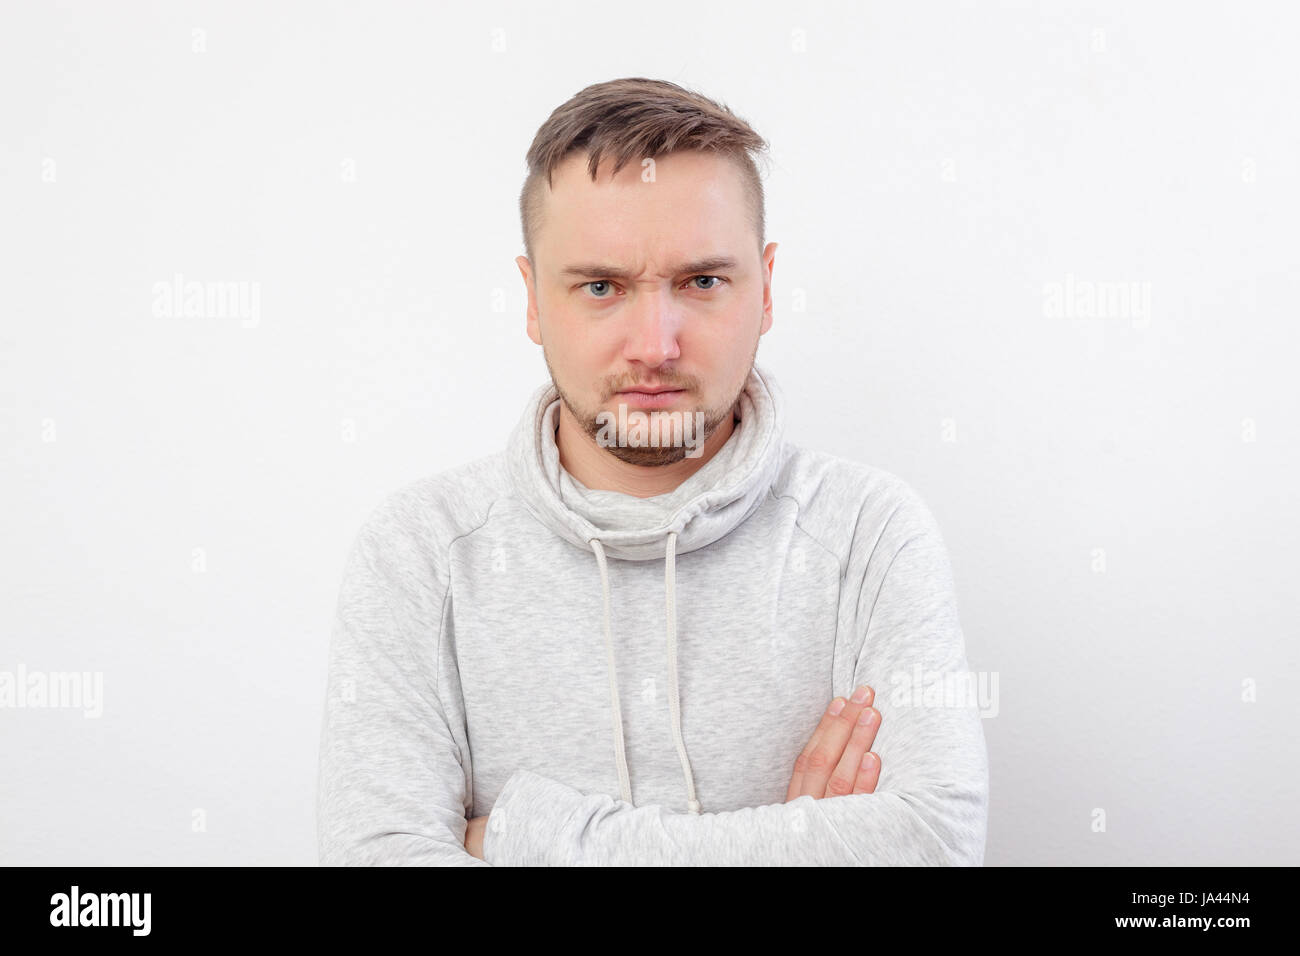 Young man in hoodie angry brow knits Stock Photo